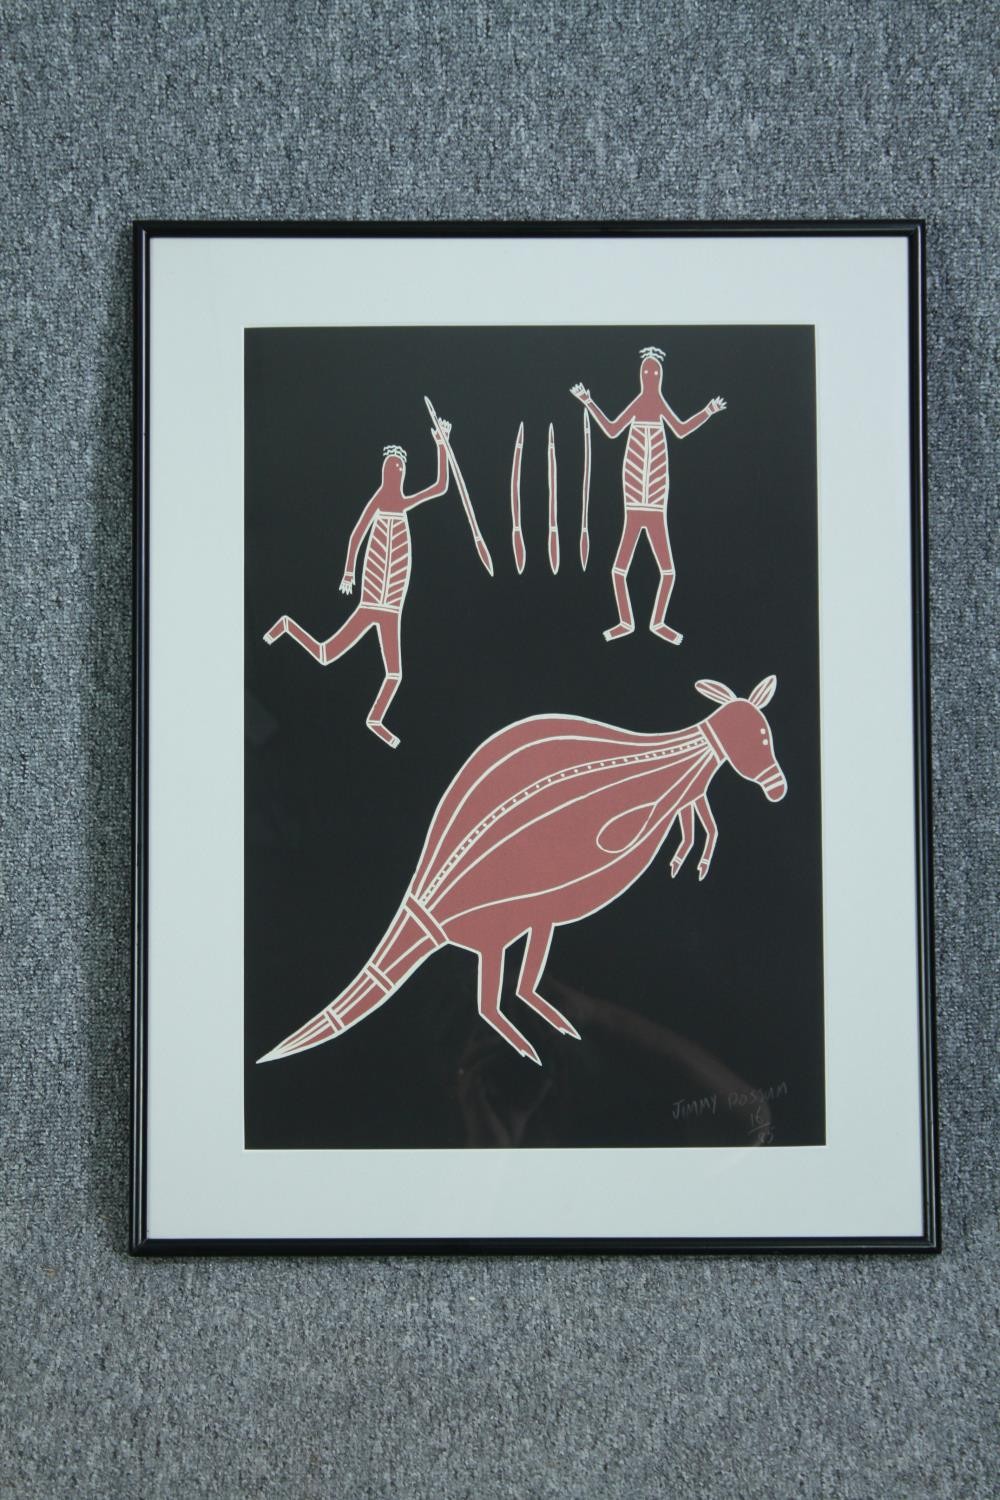 Jimmy Possum (Australian). Indigenous Art. Both printed in a limited edition of 85 copies. Both - Image 5 of 7